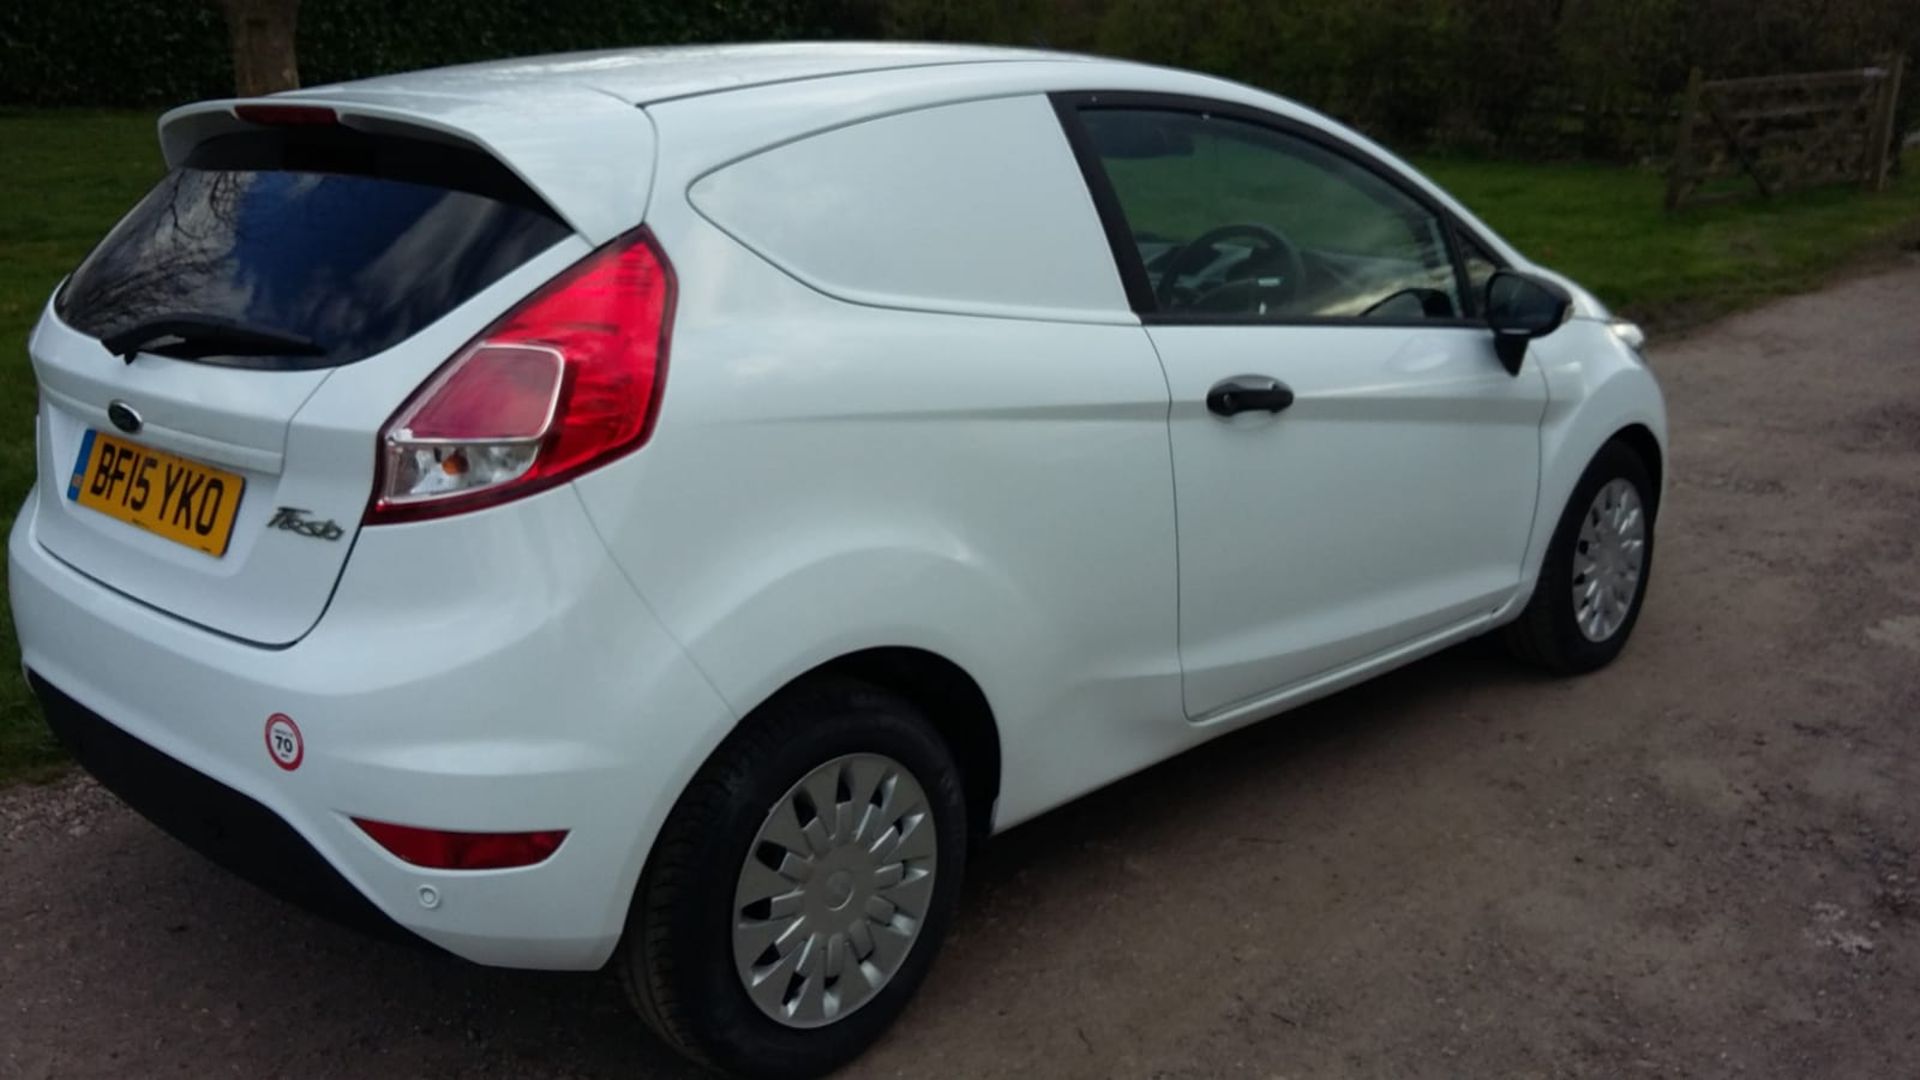 2015/15 REG FORD FIESTA ECONETIC TECH TDCI 1.6 CAR DERIVED VAN, SHOWING 0 FORMER KEEPERS *NO VAT* - Image 4 of 7